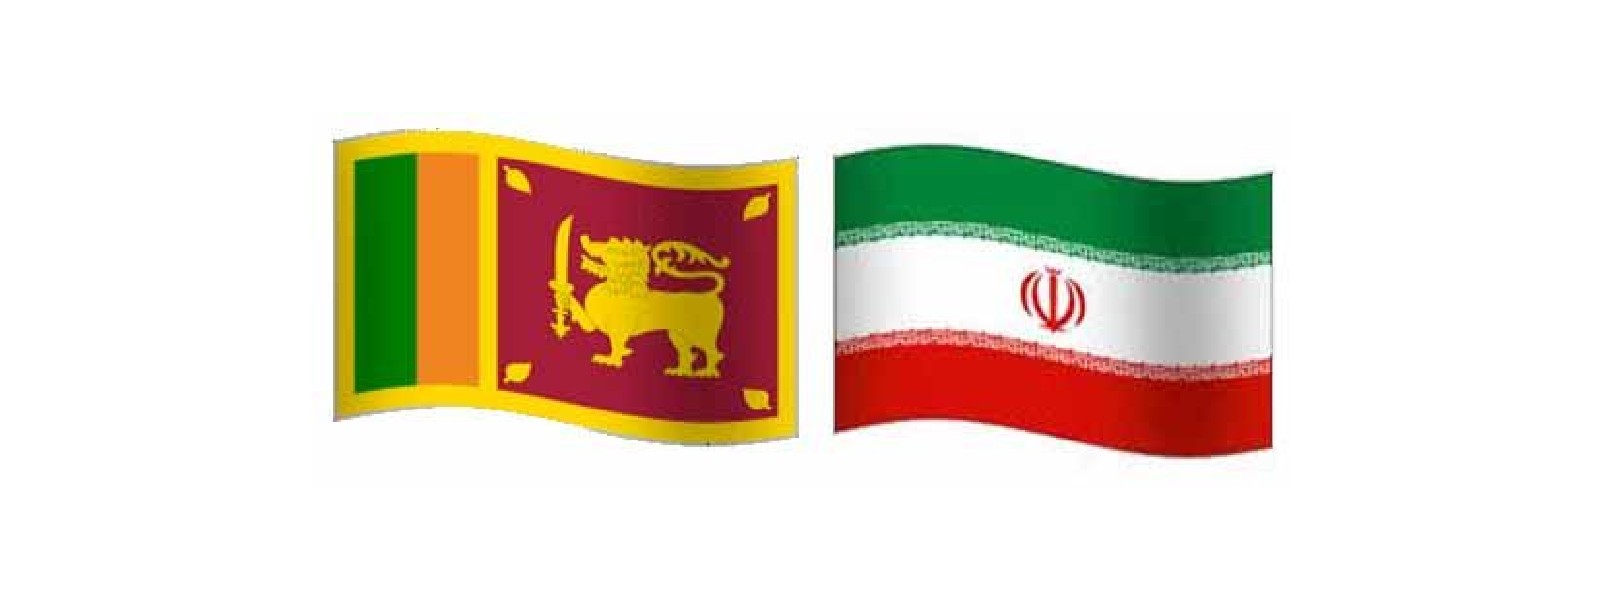 Sri Lanka signs $ 251 mn oil-for-tea deal with Iran